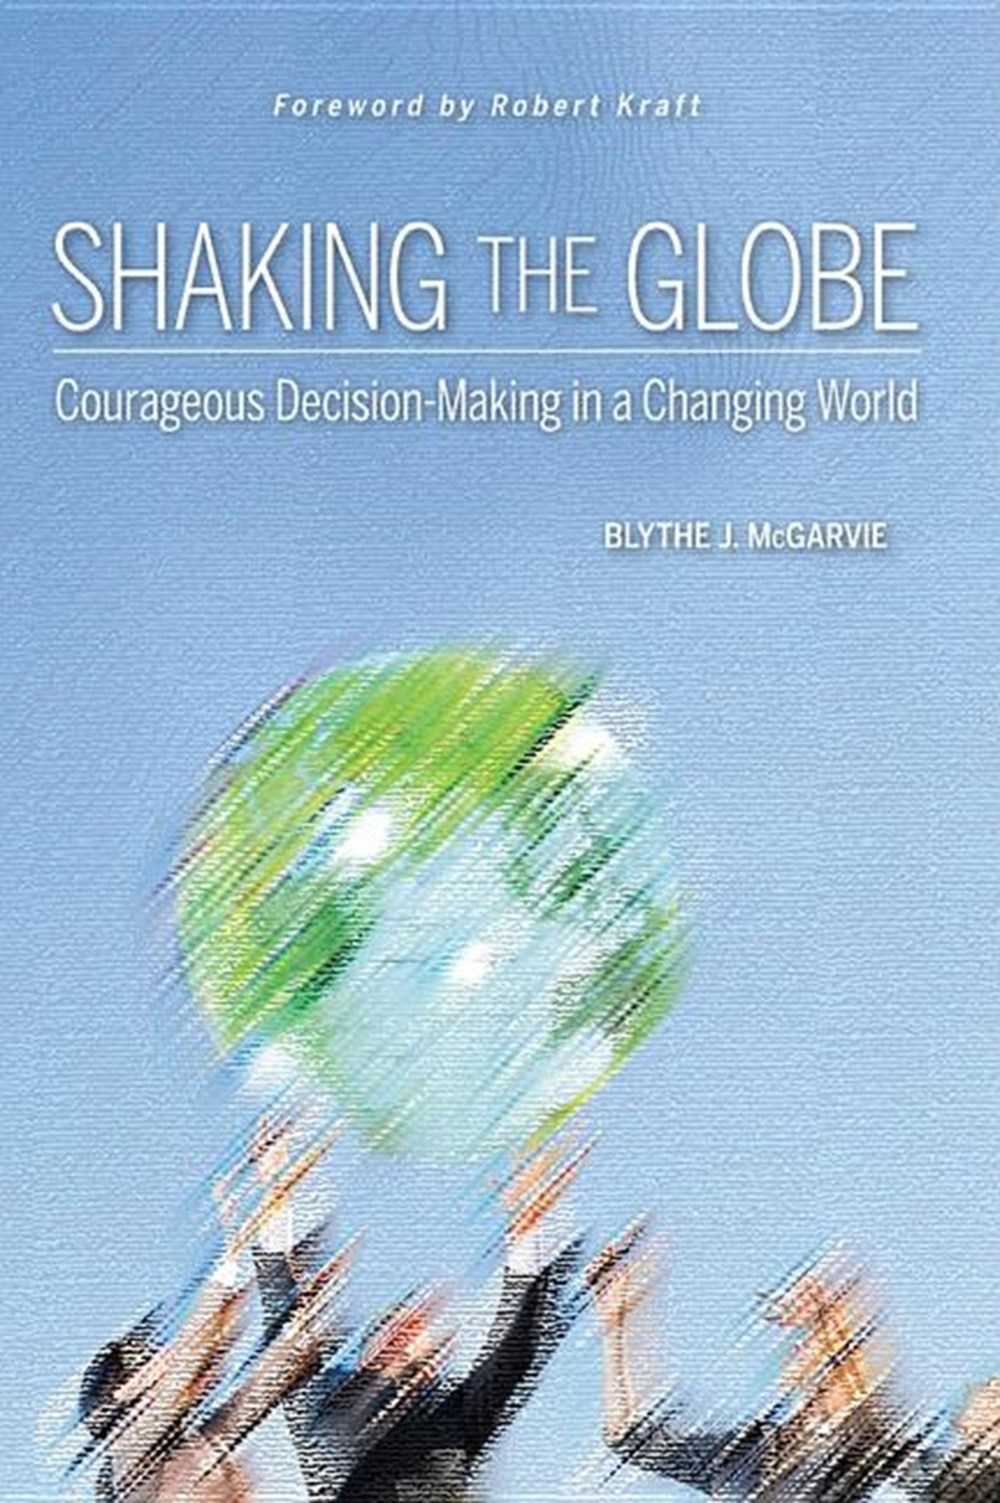 Shaking the Globe: Courageous Decision-Making in a Changing World